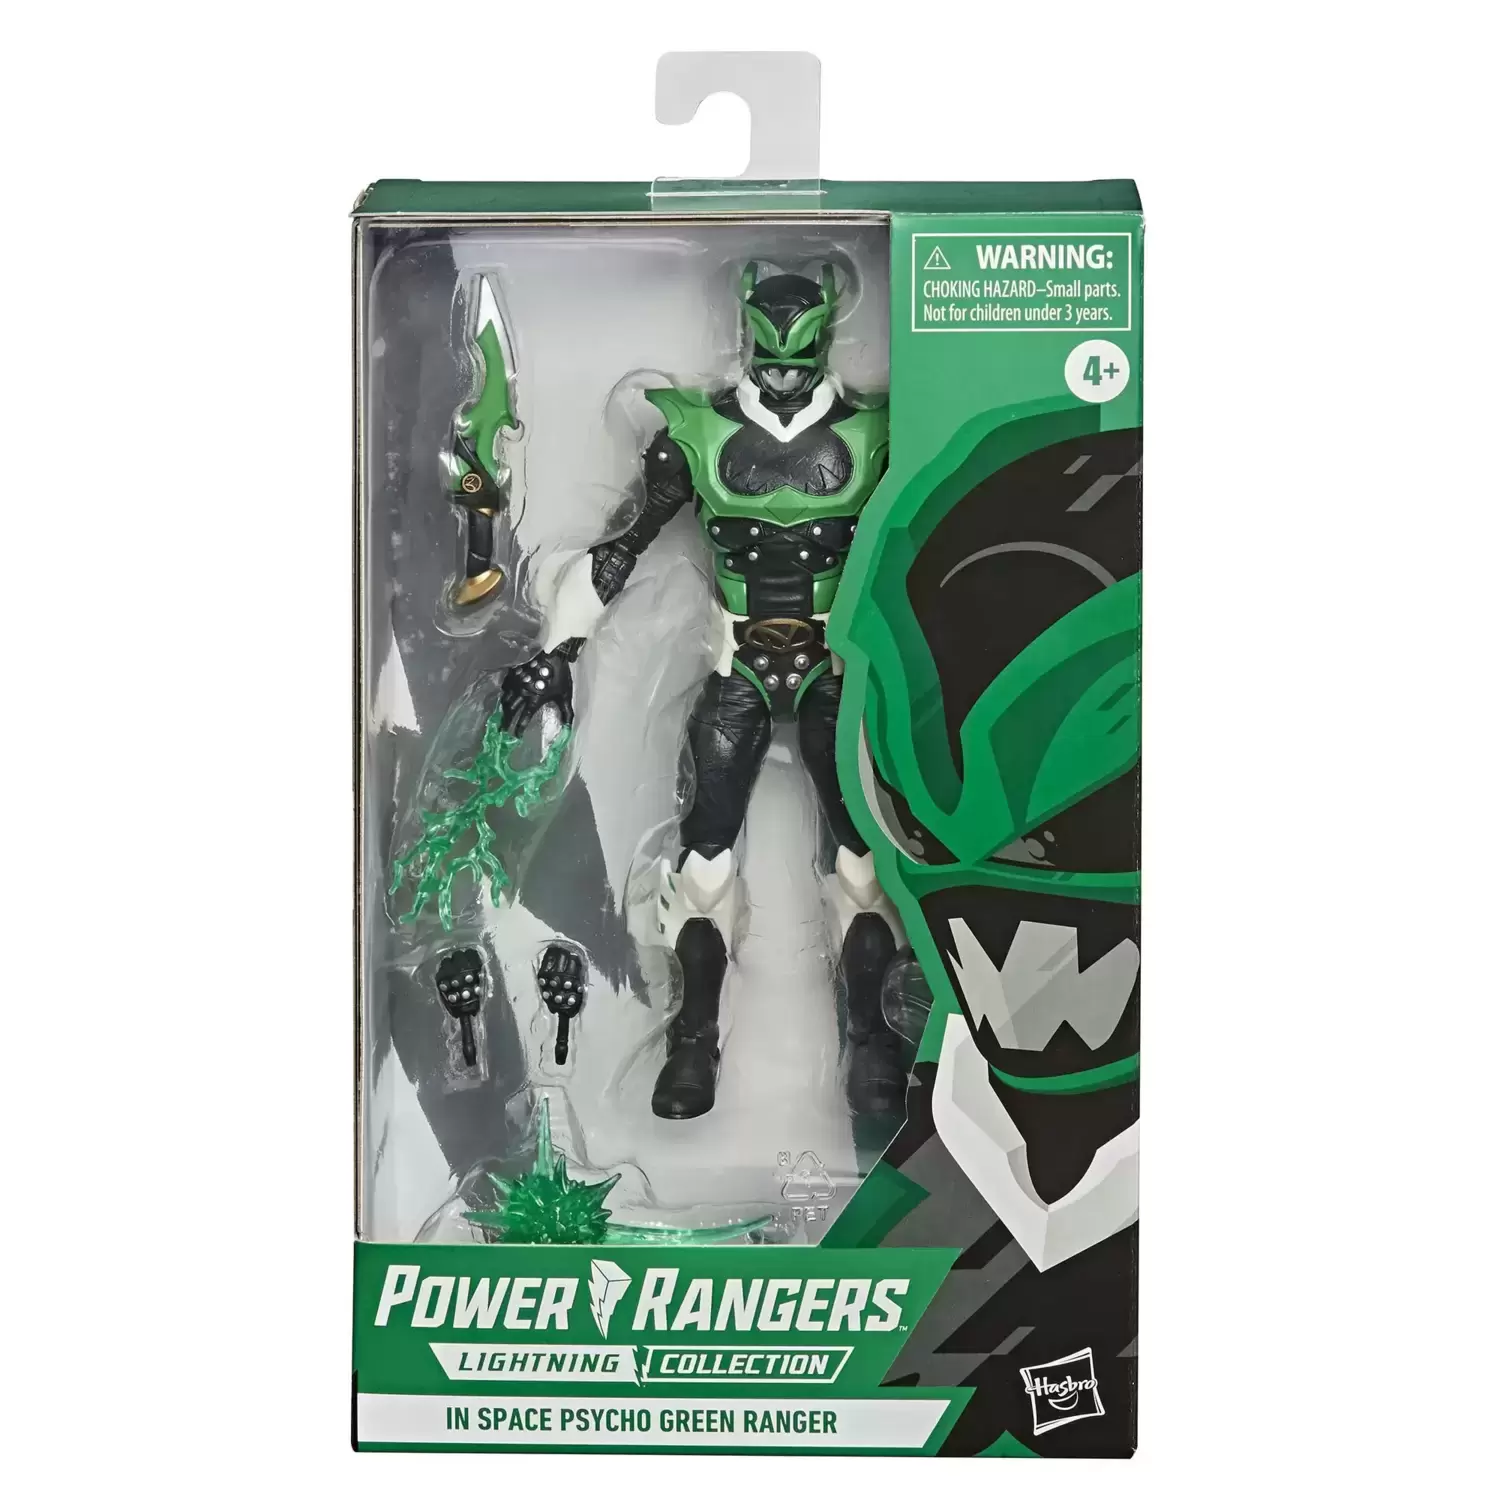 Power Rangers Hasbro - Lightning Collection - In Space Psycho Green Ranger